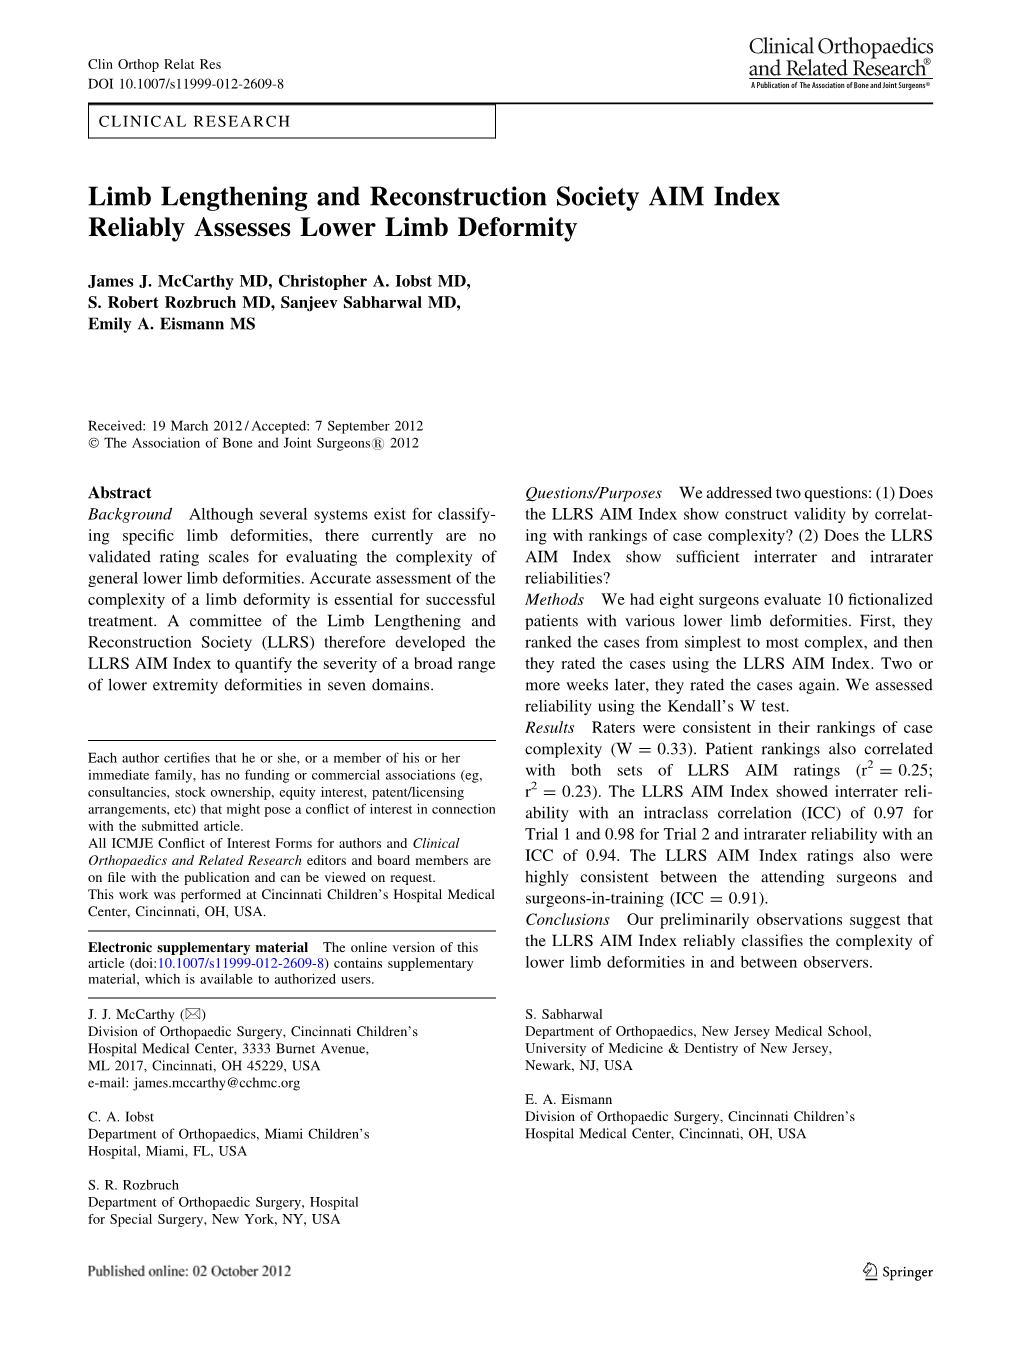 Limb Lengthening and Reconstruction Society AIM Index Reliably Assesses Lower Limb Deformity